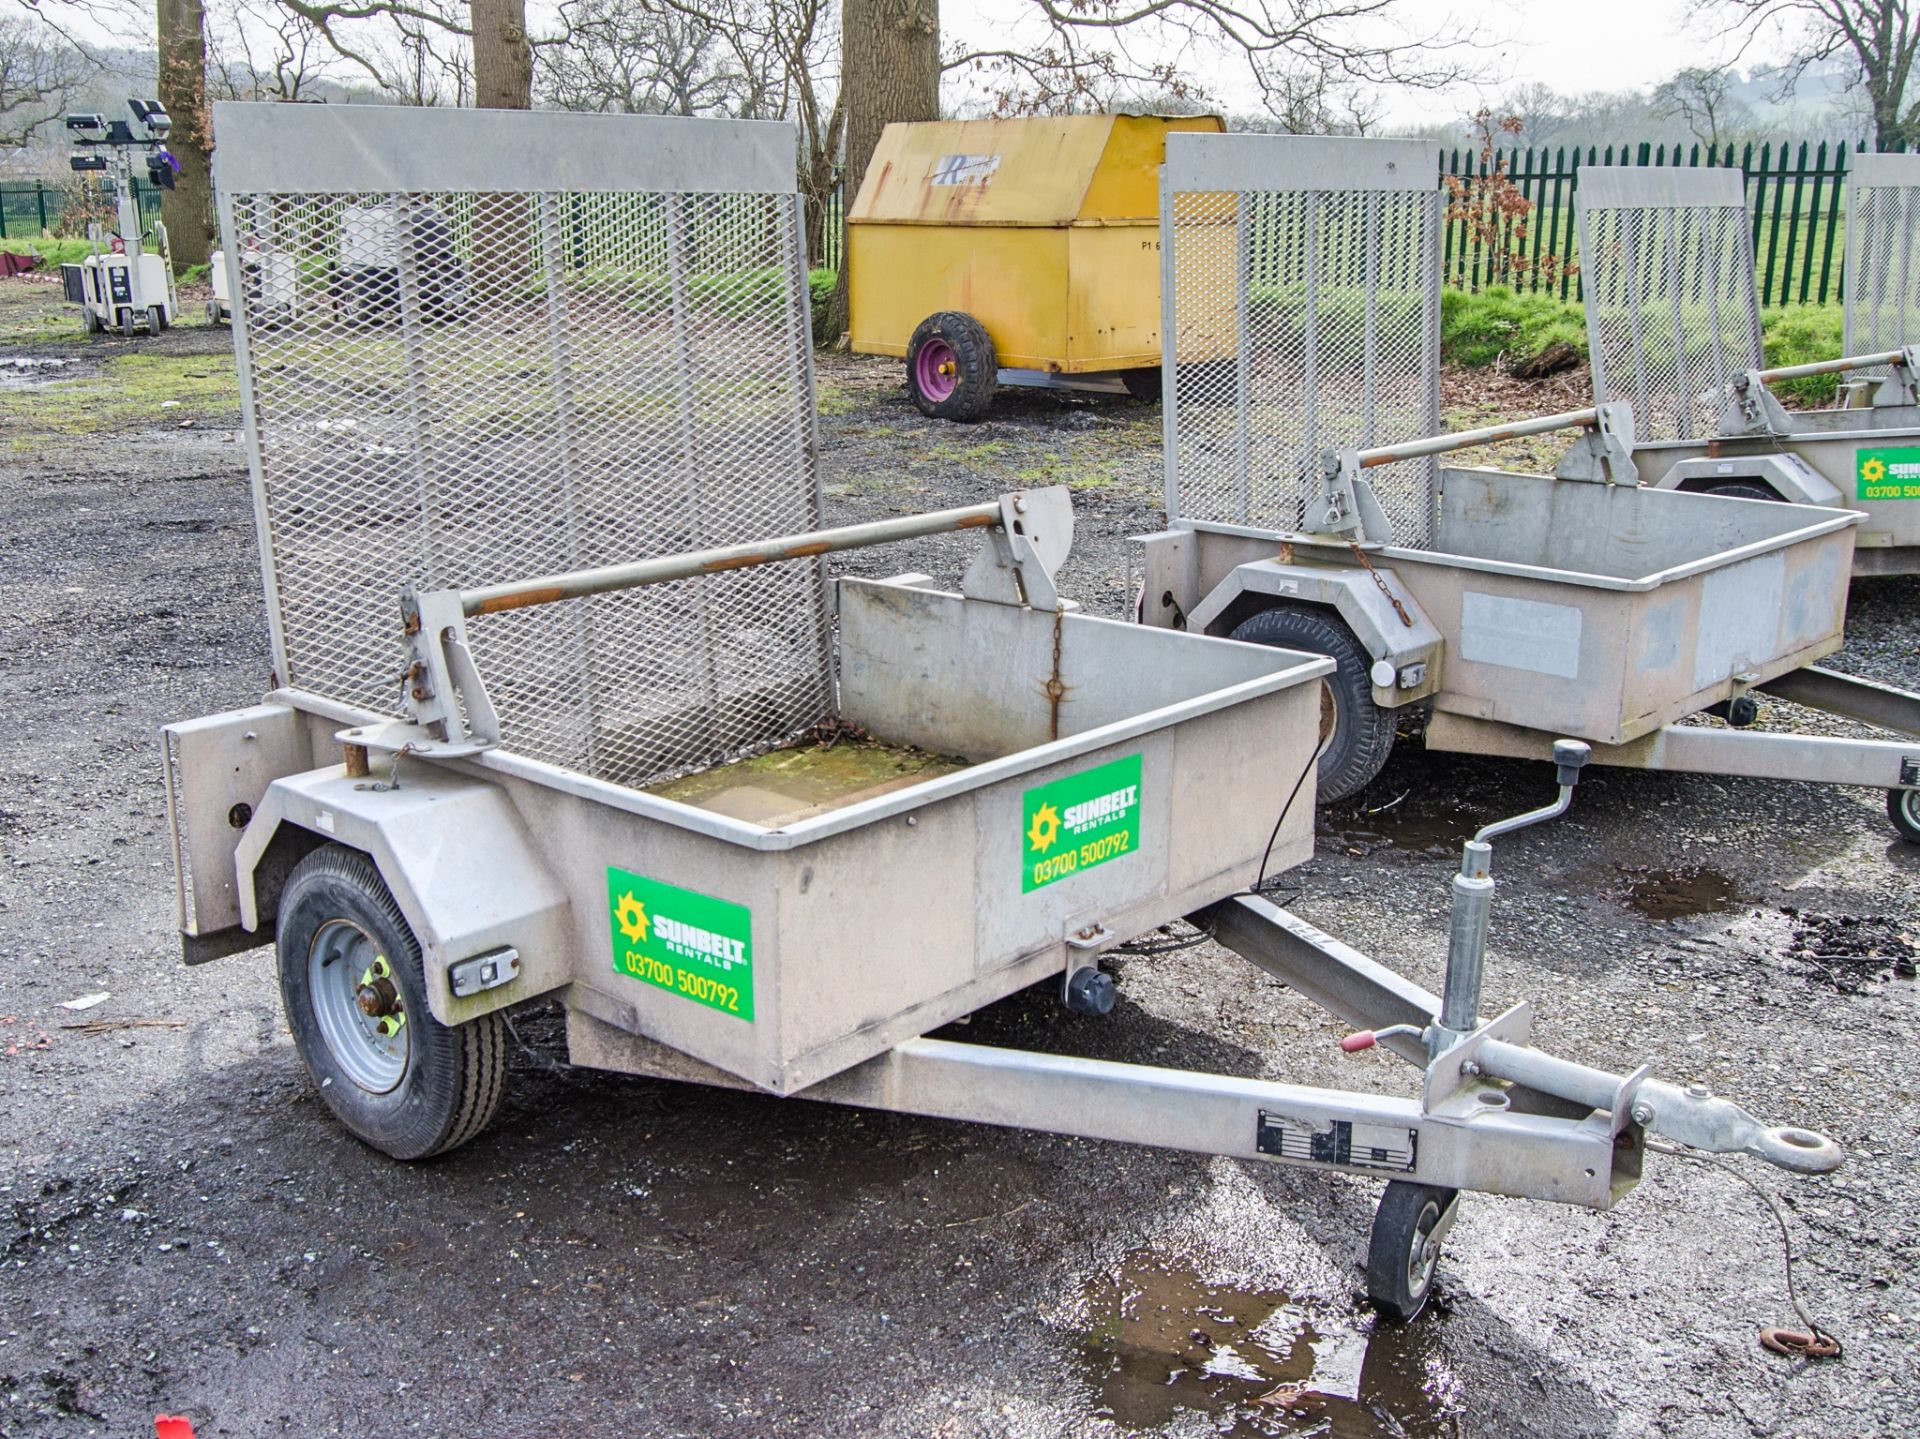 Hazlewood single axle traffic light trailer Bed size: 4ft 7 inch wide x 4ft long A786537 - Image 2 of 5